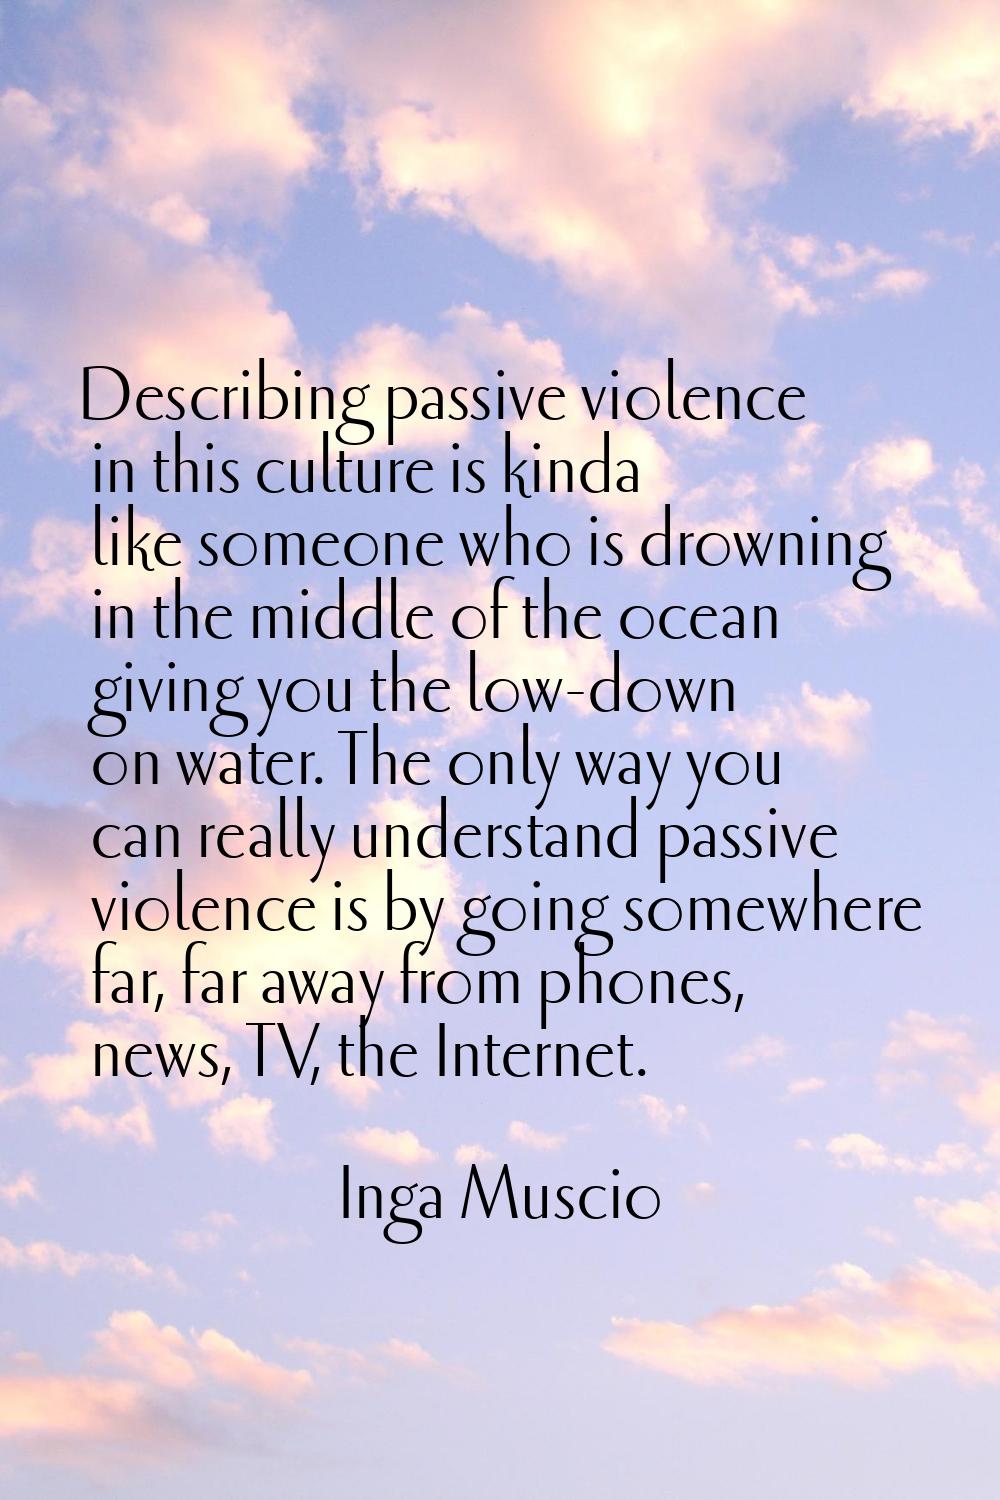 Describing passive violence in this culture is kinda like someone who is drowning in the middle of 